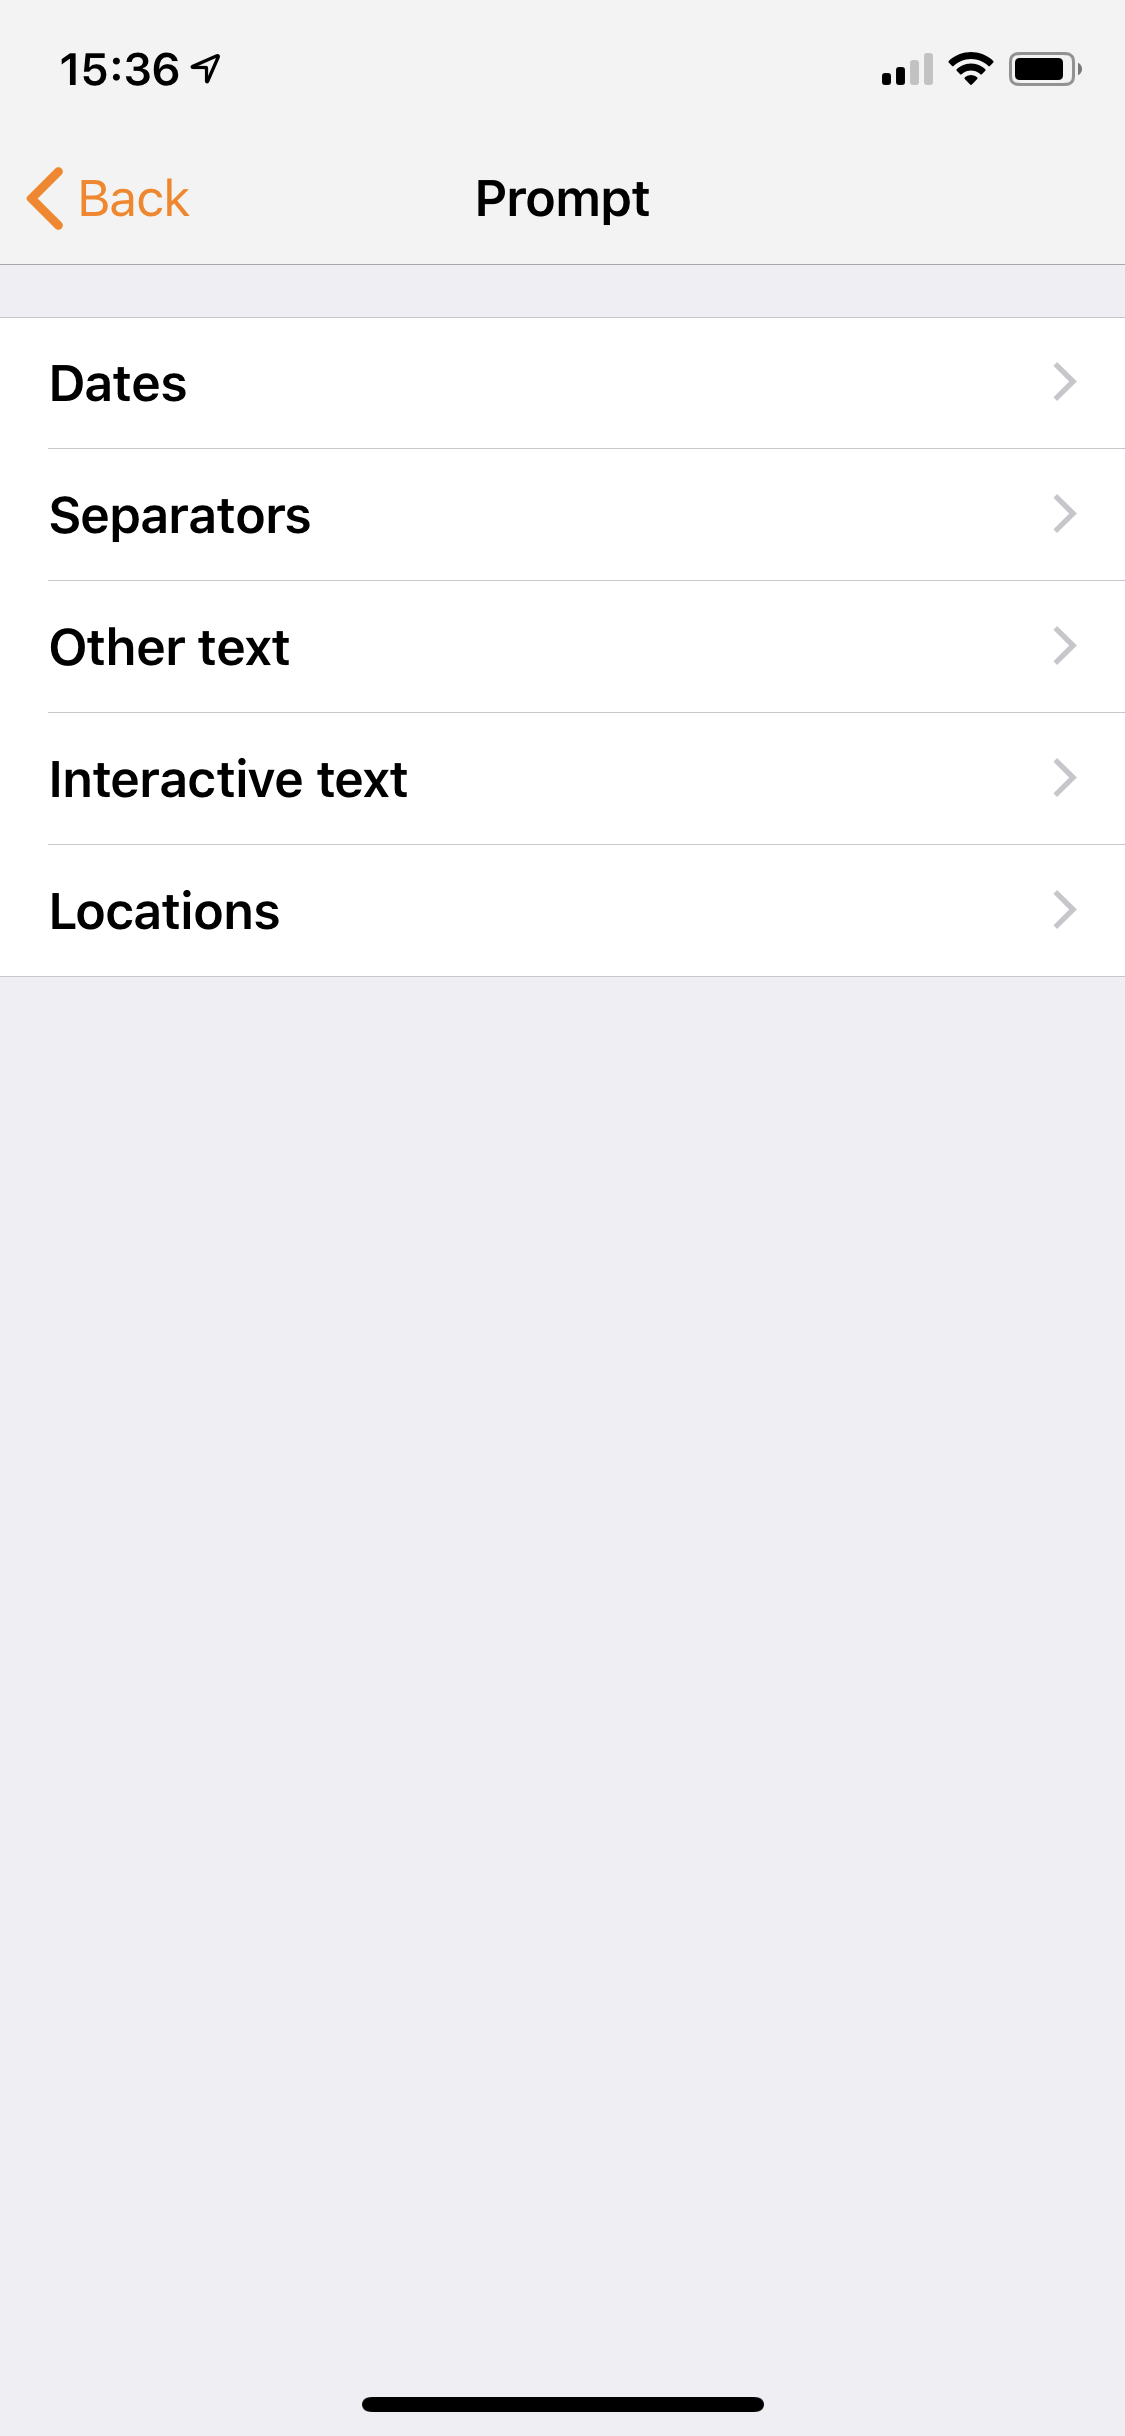 The interactive text category